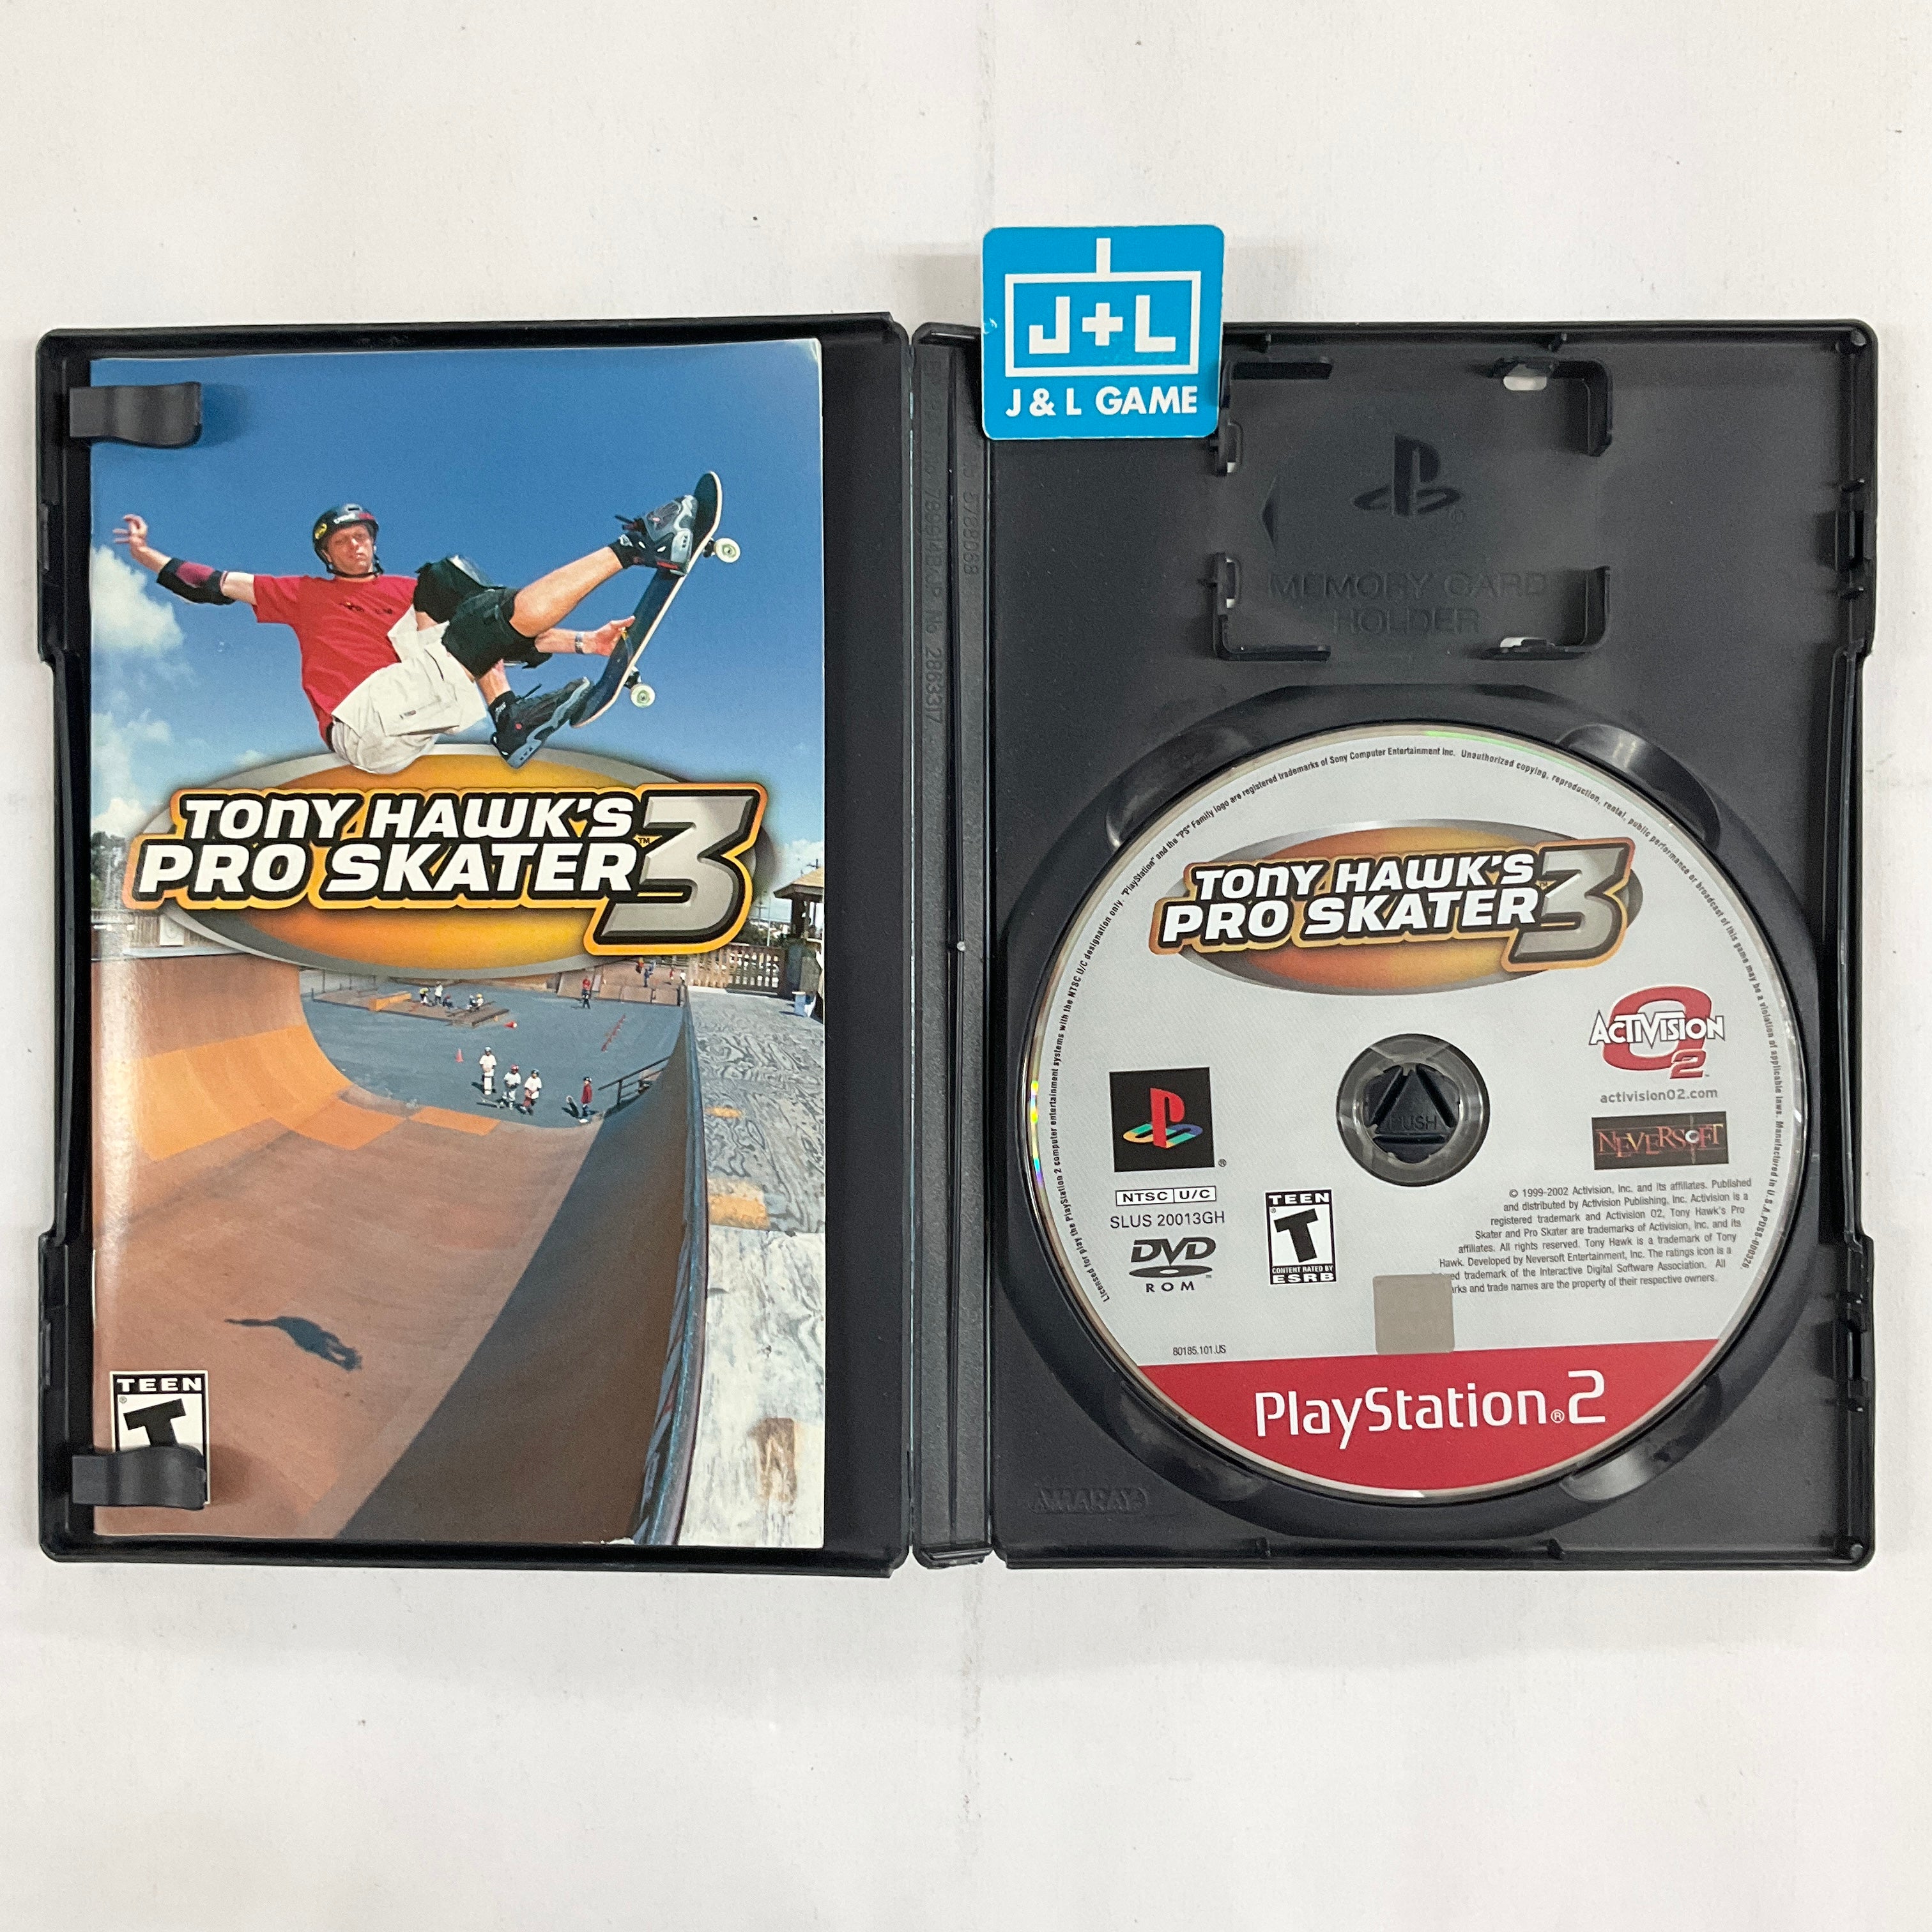 Tony Hawk's Pro Skater 3 (Greatest Hits) - (PS2) PlayStation 2 [Pre-Owned] Video Games Activision   